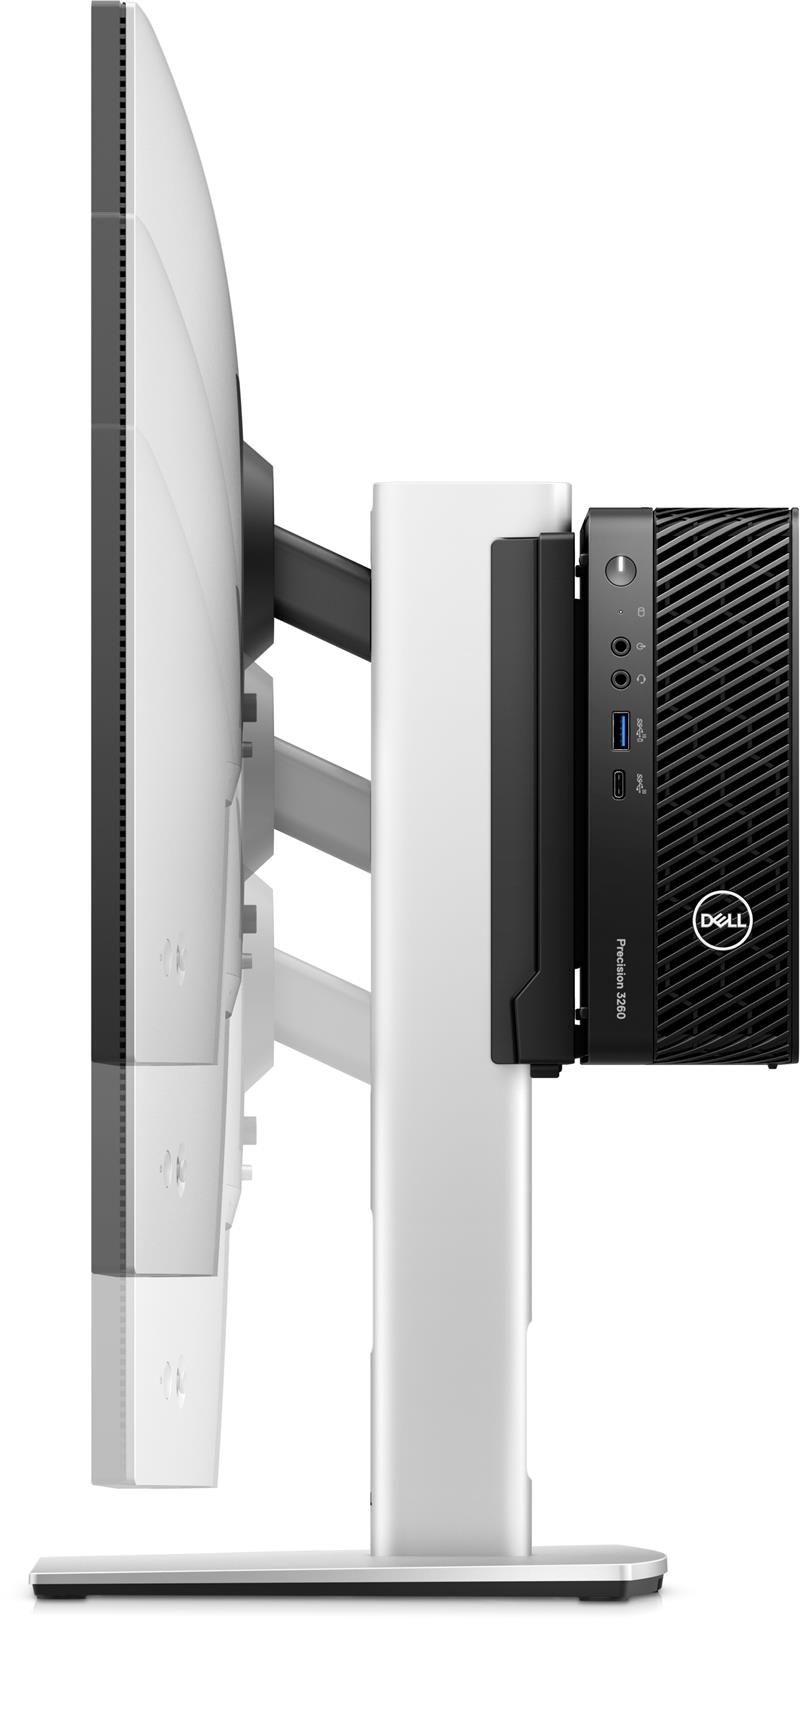 Compact Form Factor All-in-One Stand